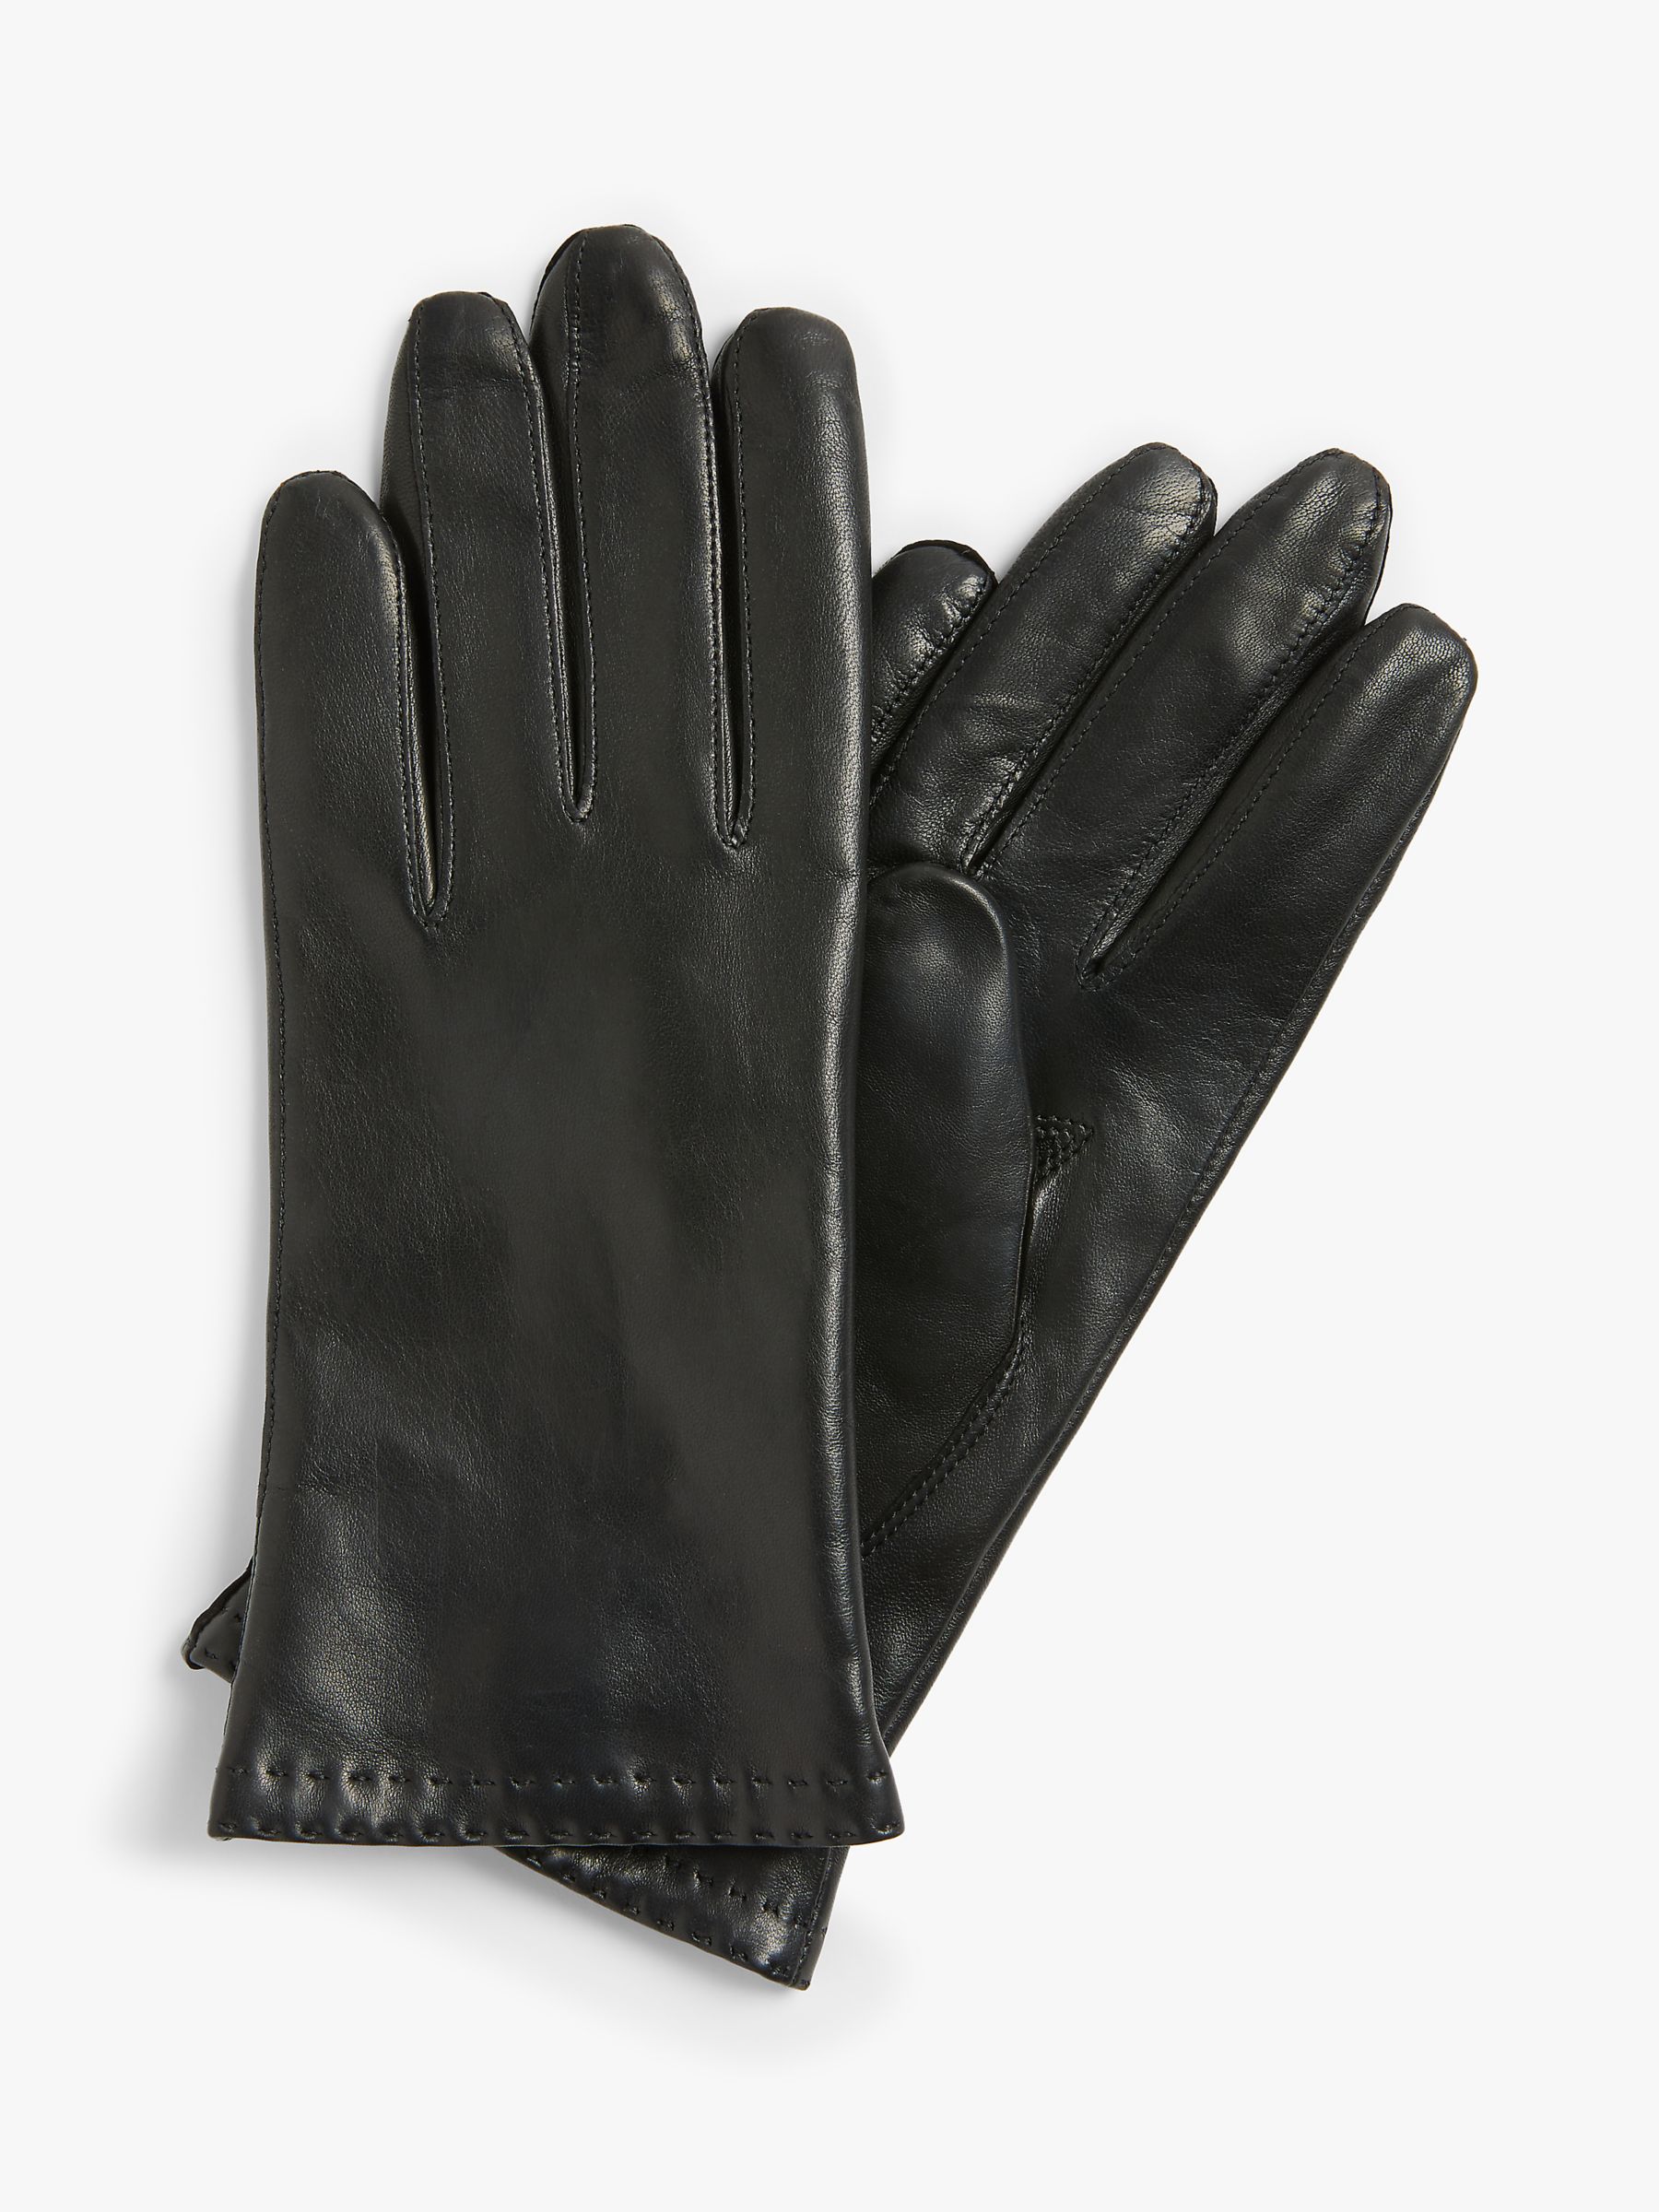 John Lewis Cashmere Lined Women's Leather Gloves, Black, XS